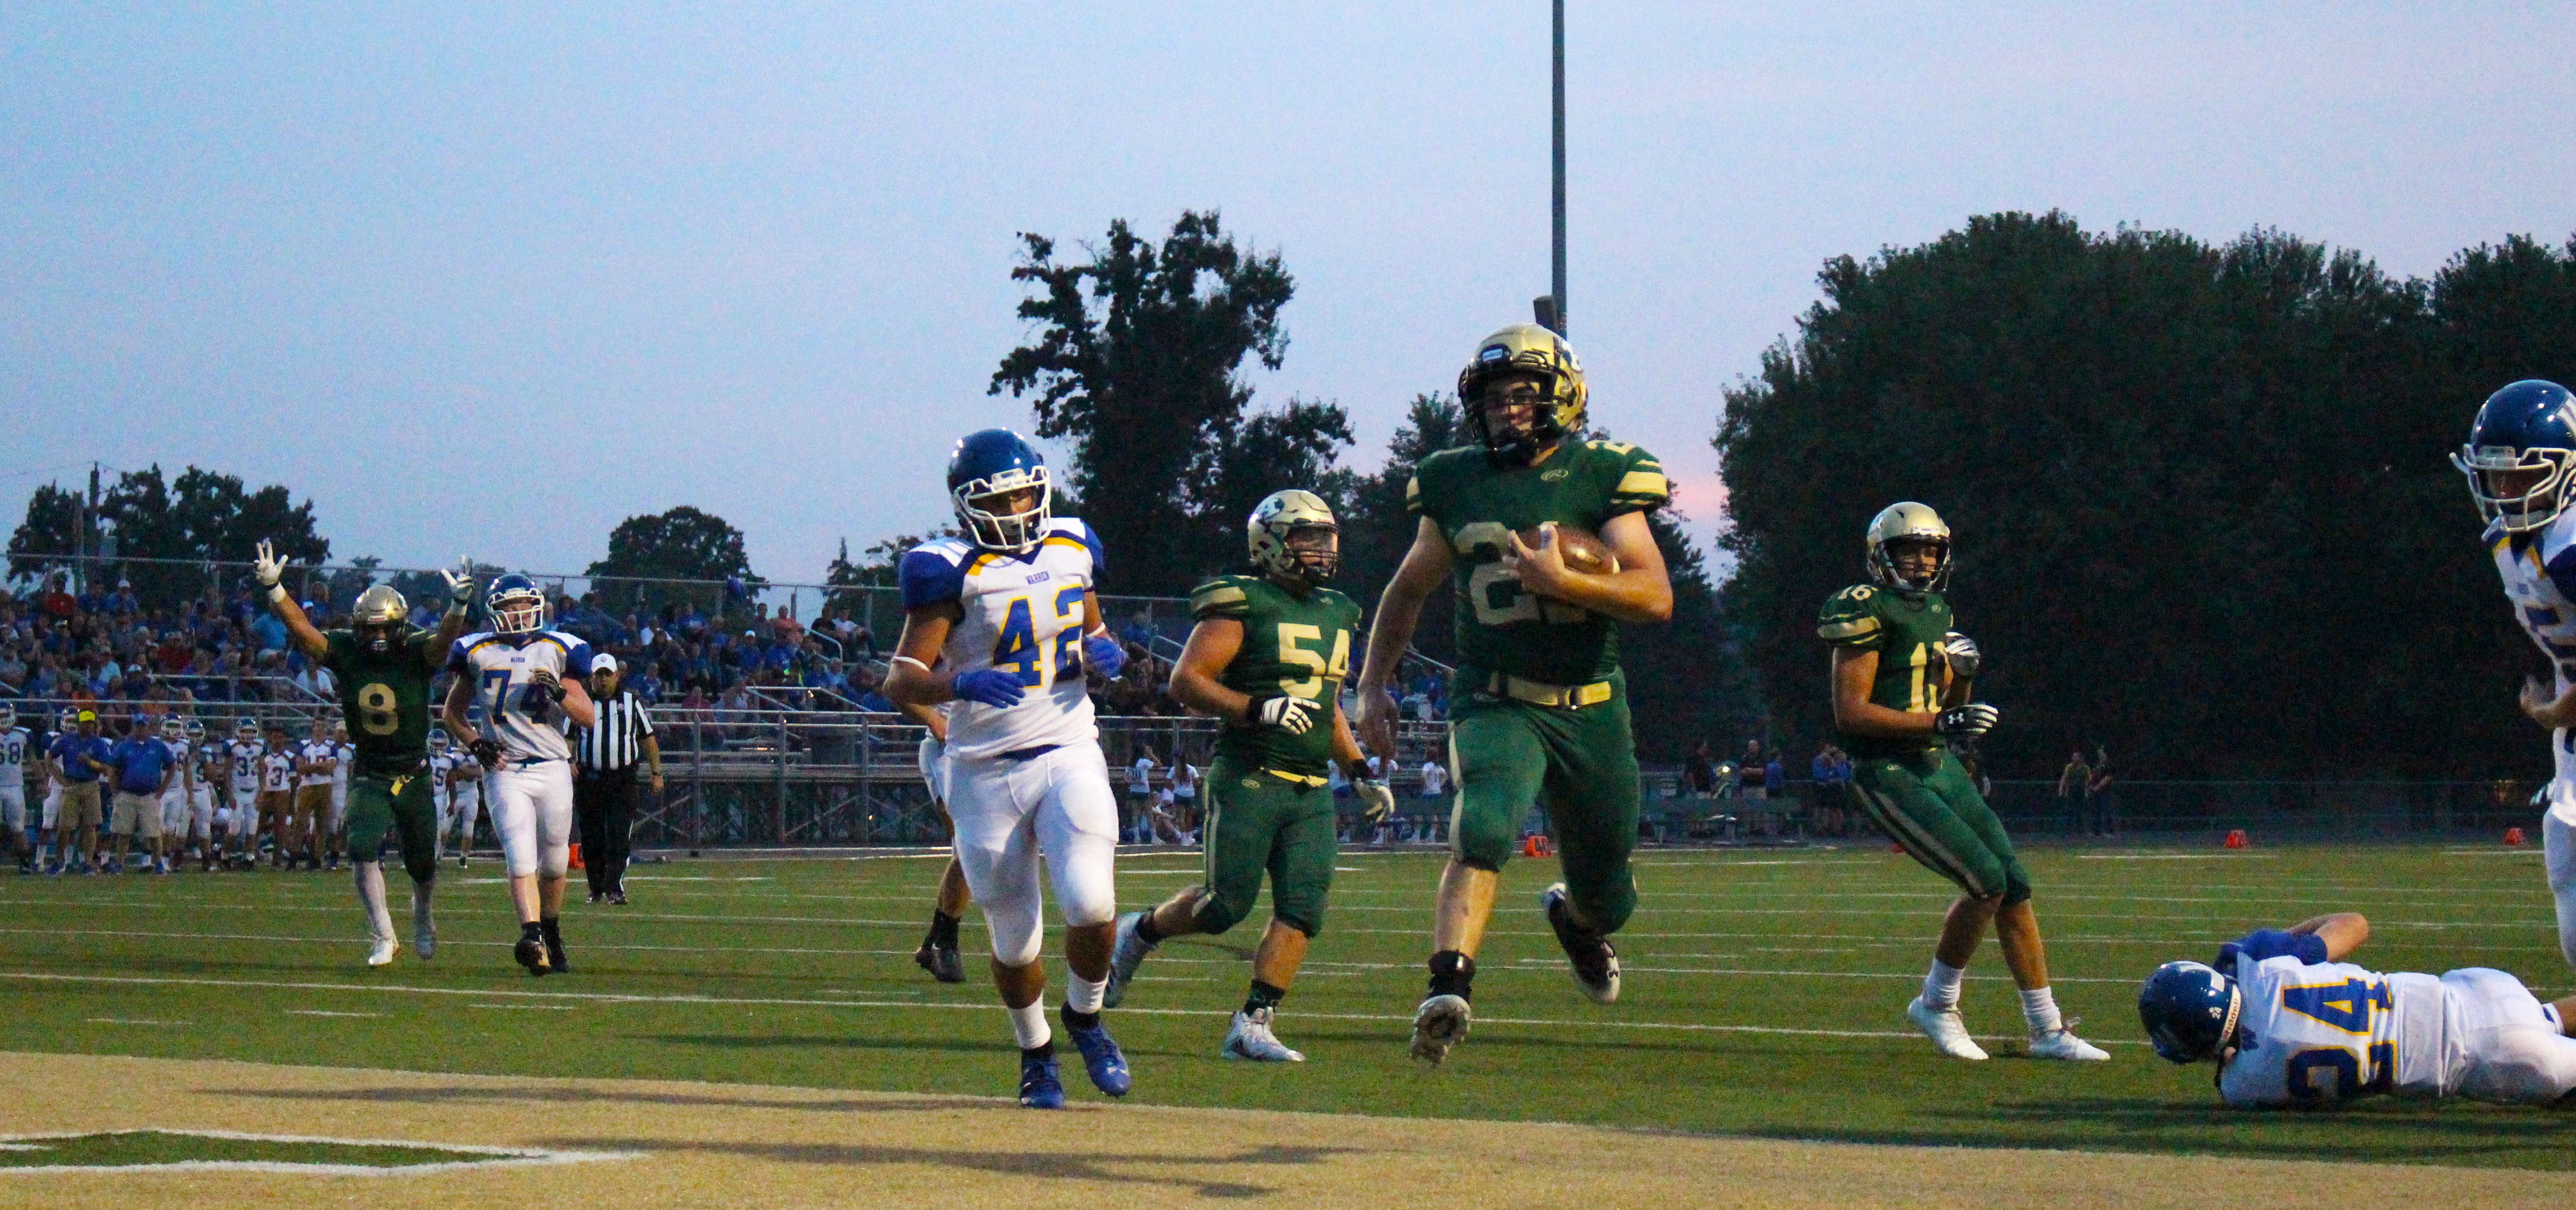 Athens player runs with football.